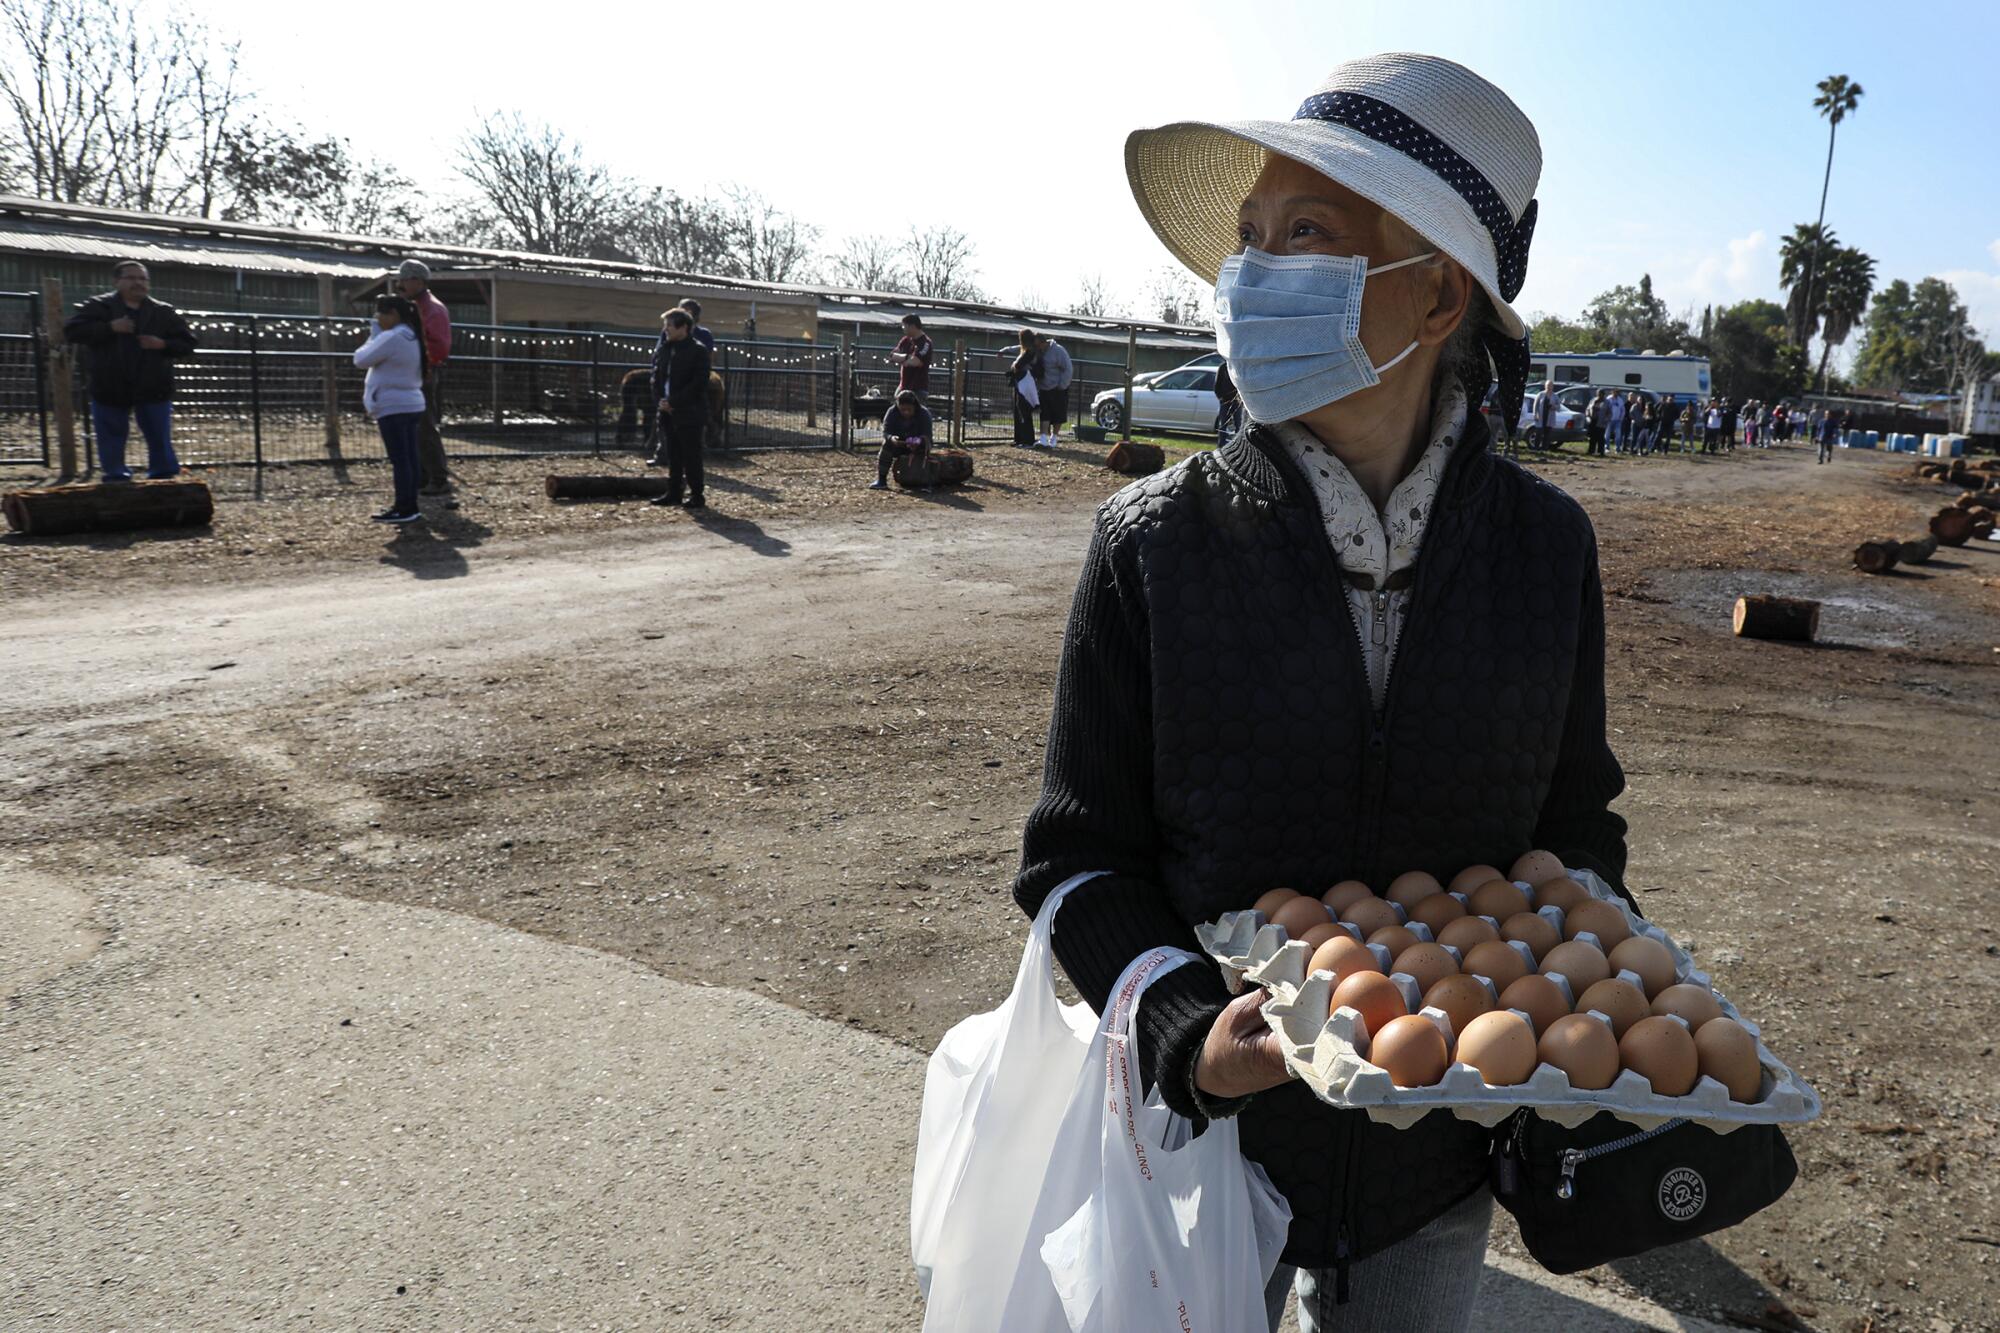 Xiao Ping, holding a tray of eggs, looks back at the long line of egg buyers in Chino. People started lining up early at Maust's California Poultry in Chino.